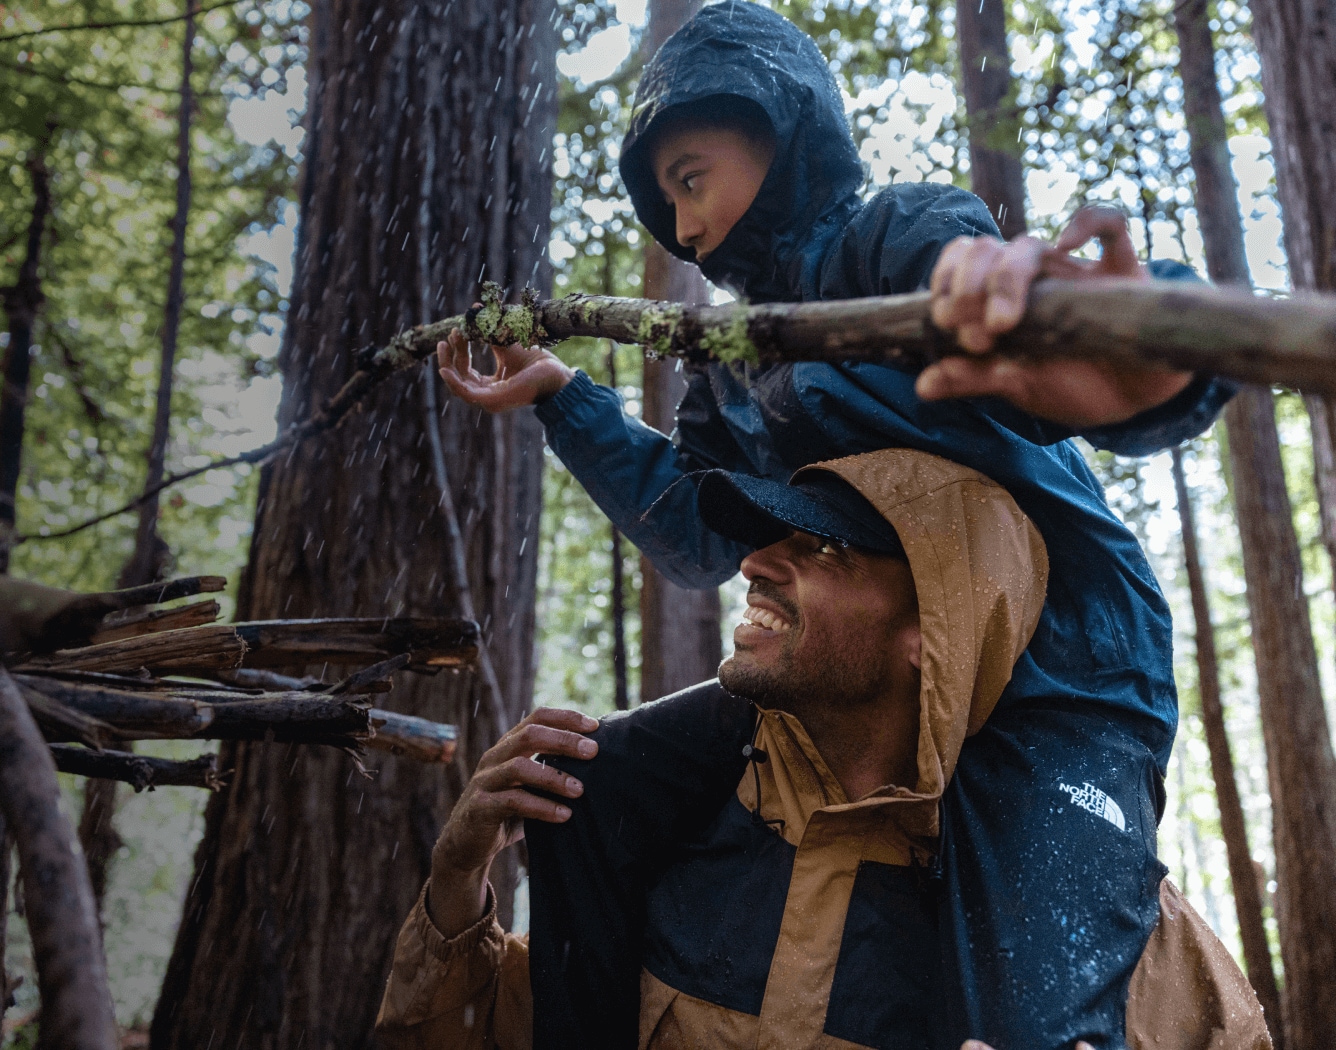 A man is giving a child a piggyback ride in a rainy forest while they wear rainwear from The North Face.